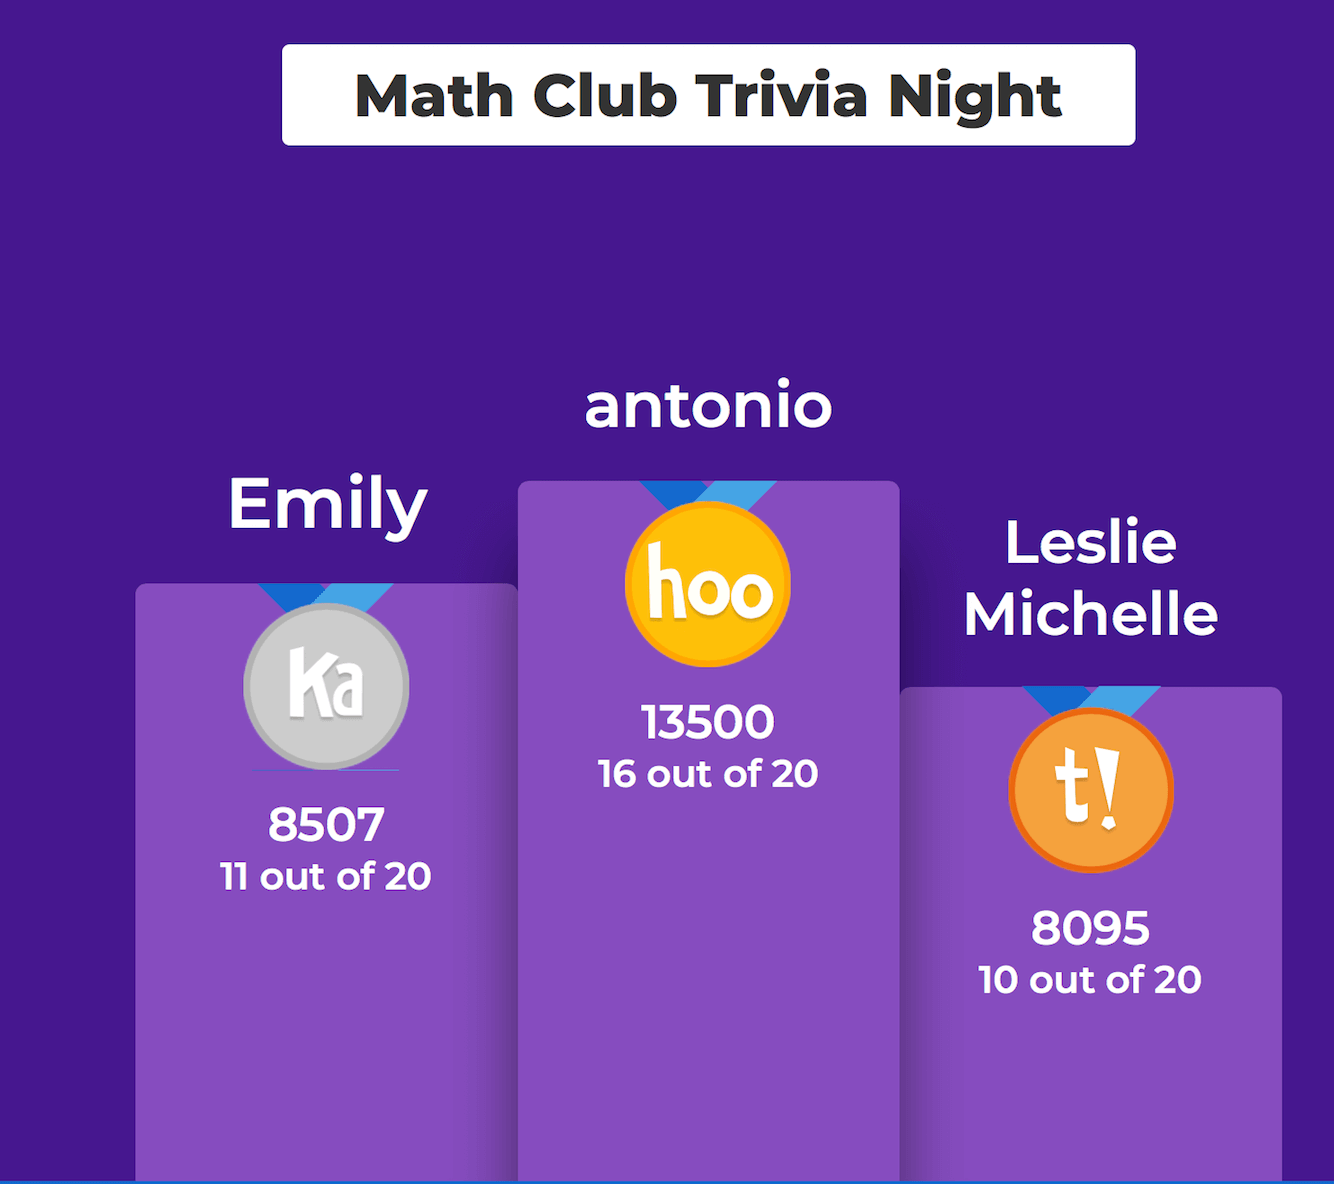 Image of high scoring students from Math Club Trivia Night